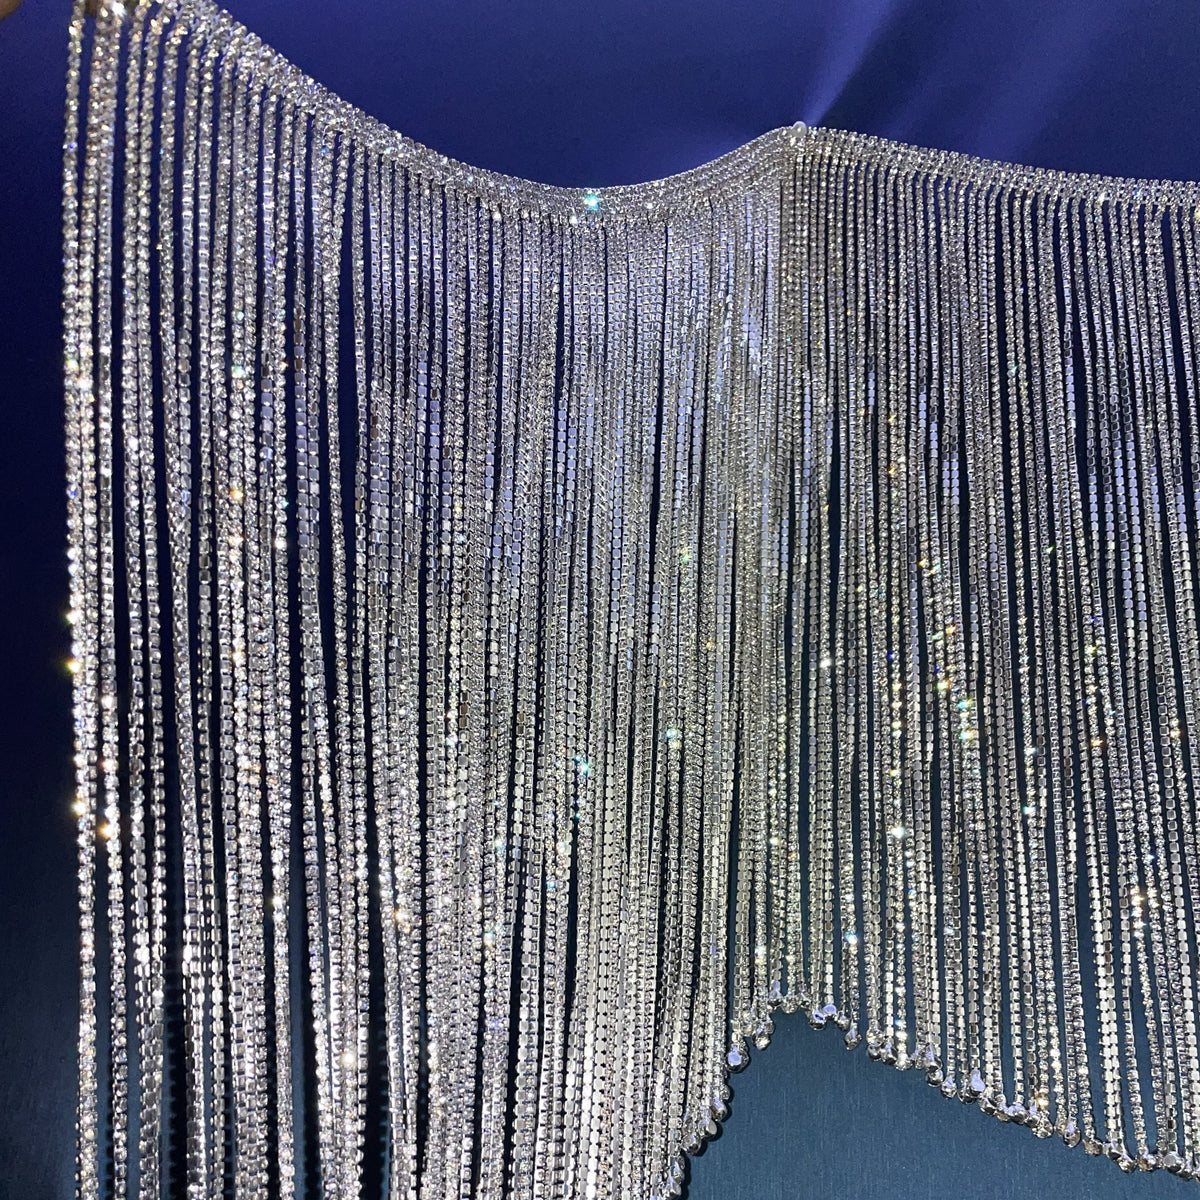 Perial Co Blue Rhinestone Fringe Trim Sold by the Yard 18 inches